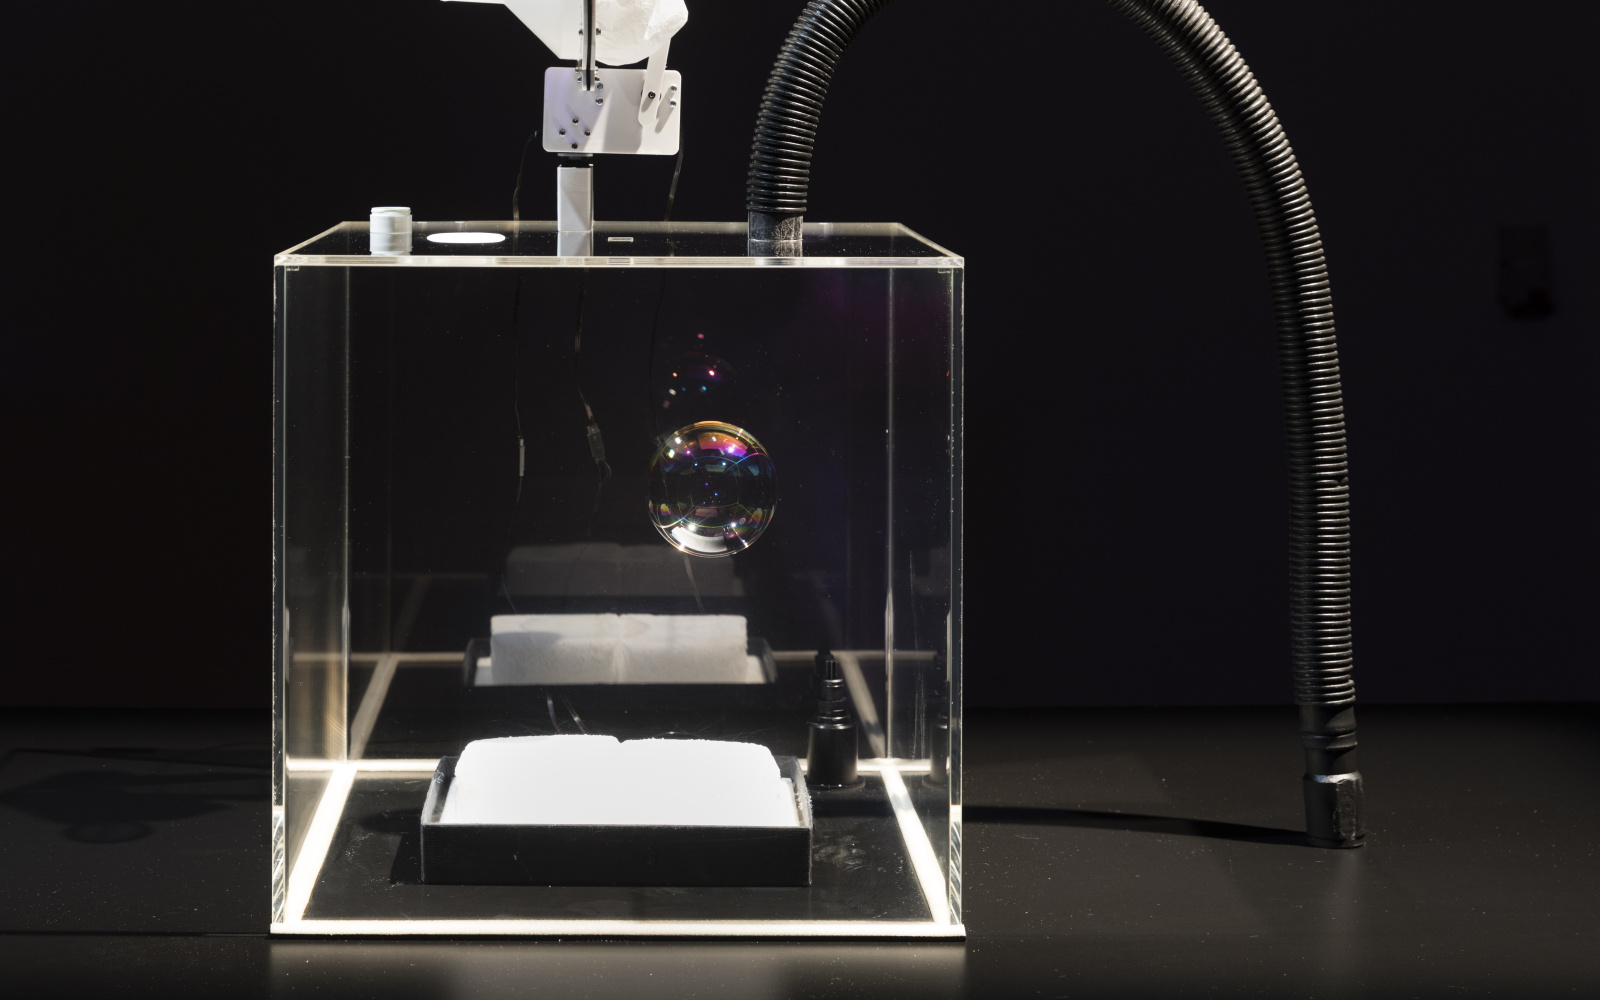 A soap bubble floats in a glass box. A hose and other equipment are connected to the box.